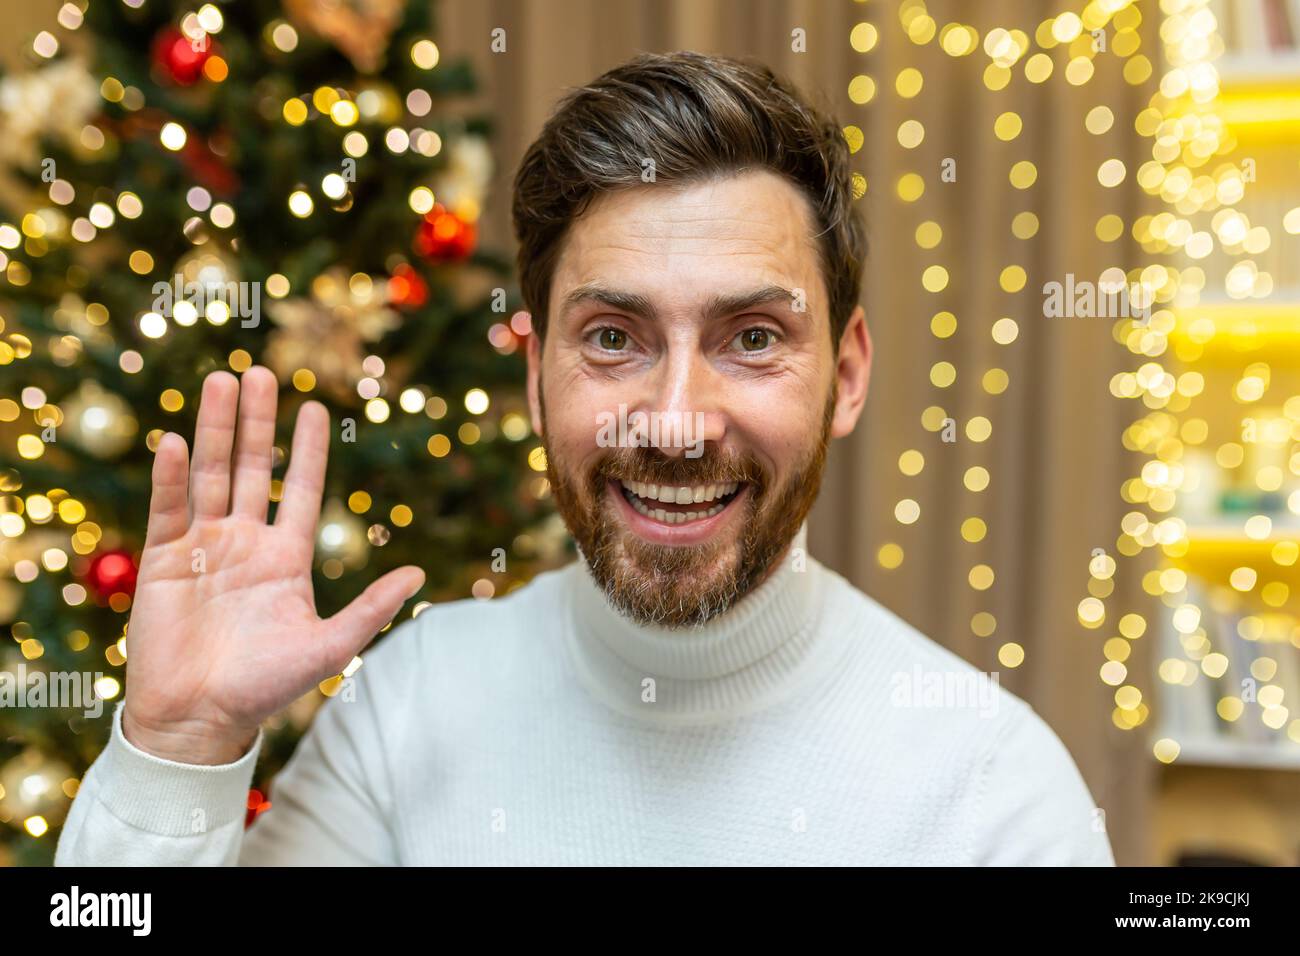 Online greetings video call, Christmas man looks into web camera and smiles and waves while sitting on sofa at home celebrating New Year holidays. Stock Photo